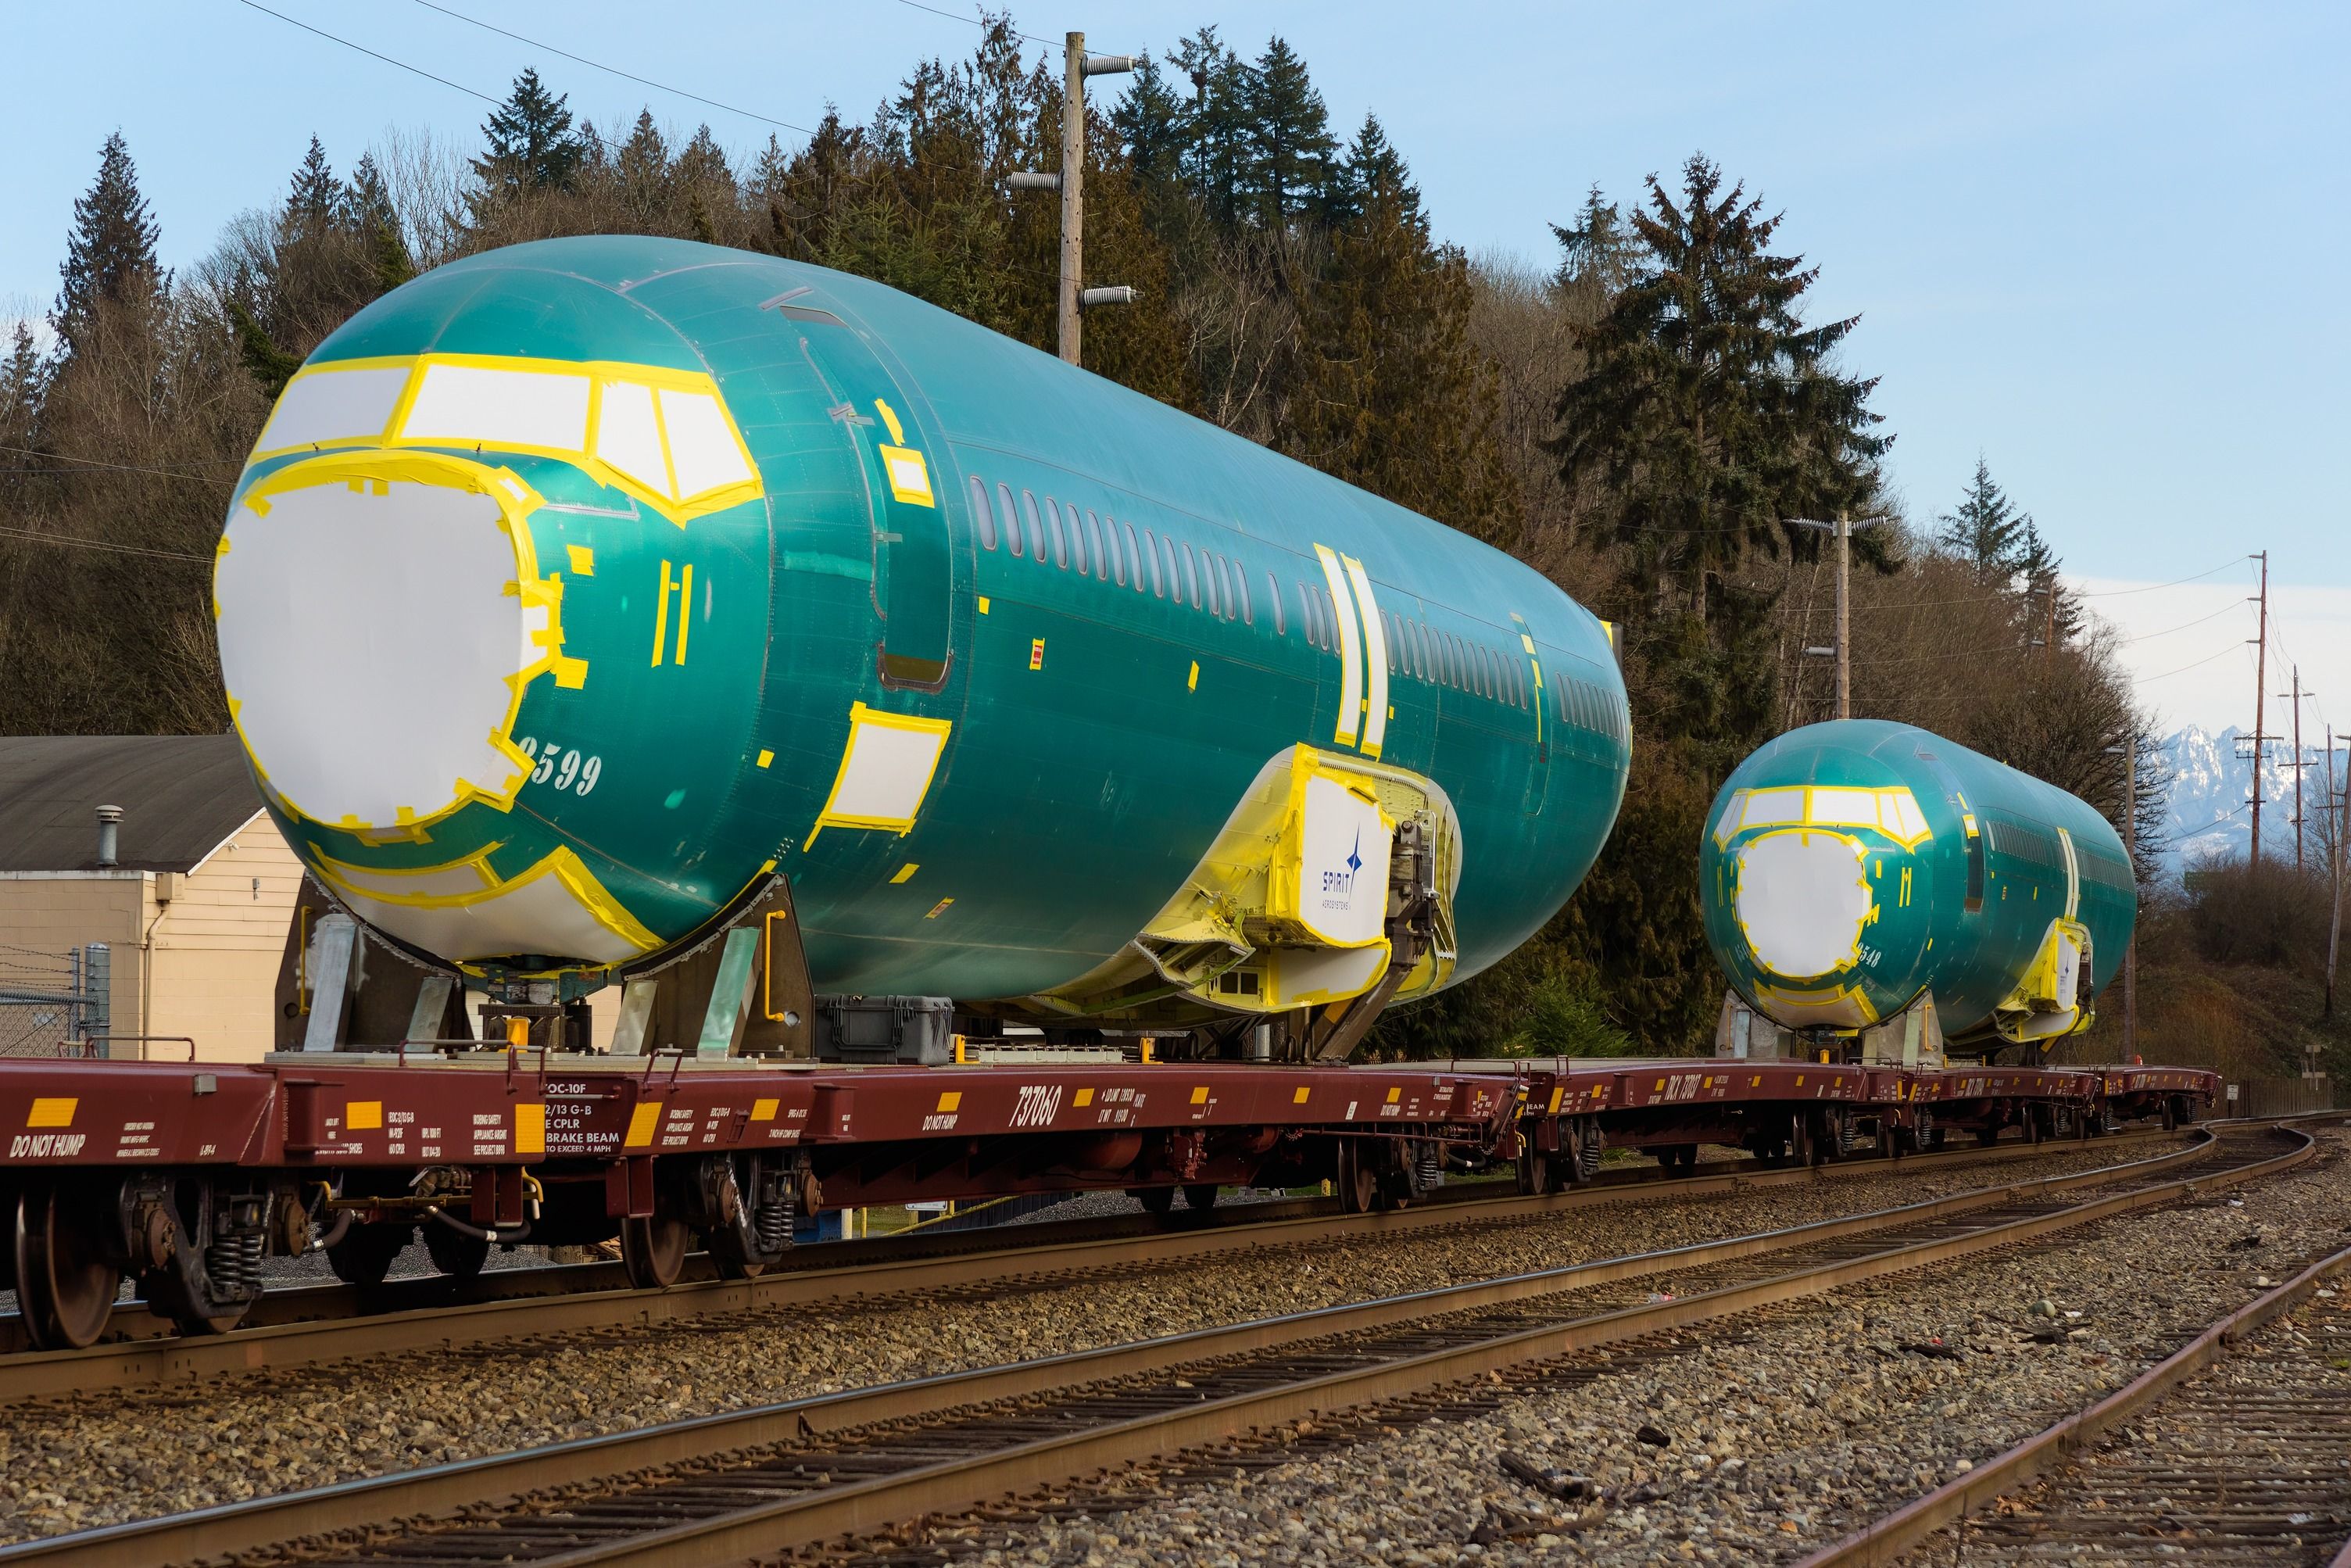 Boeing 737 fuselages being shipped on a train